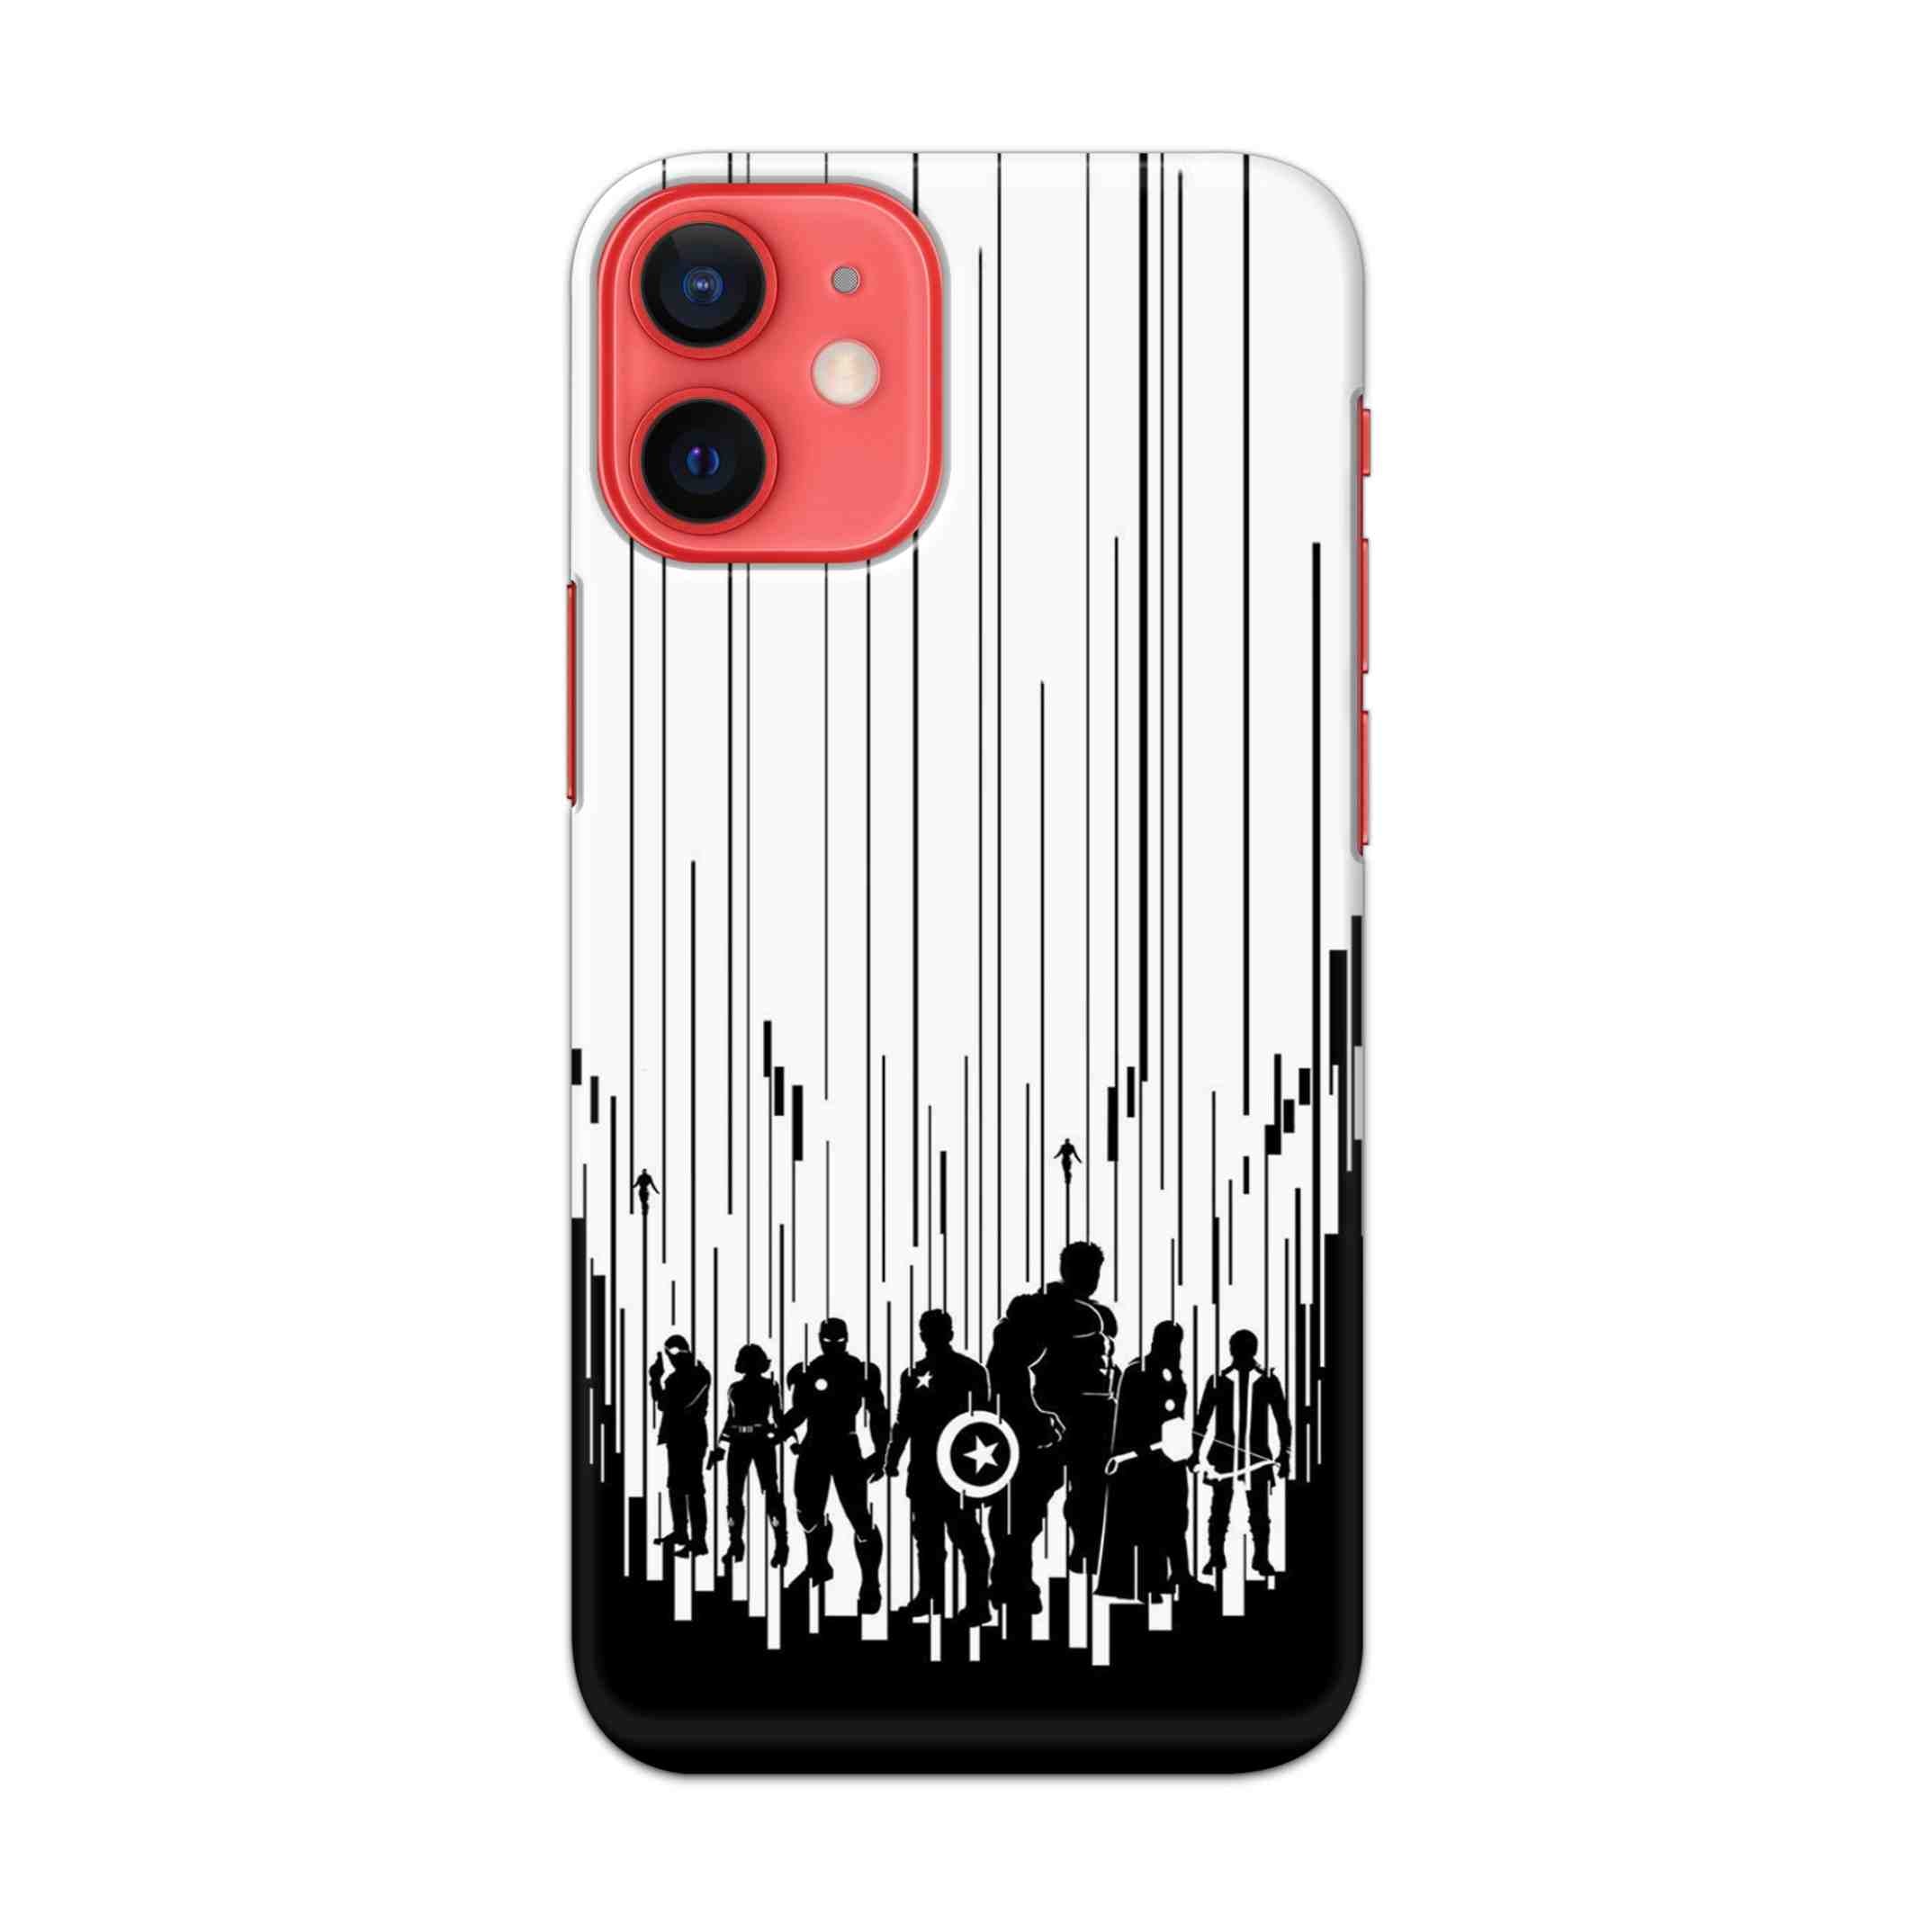 Buy Black And White Avanegers Hard Back Mobile Phone Case/Cover For Apple iPhone 12 mini Online